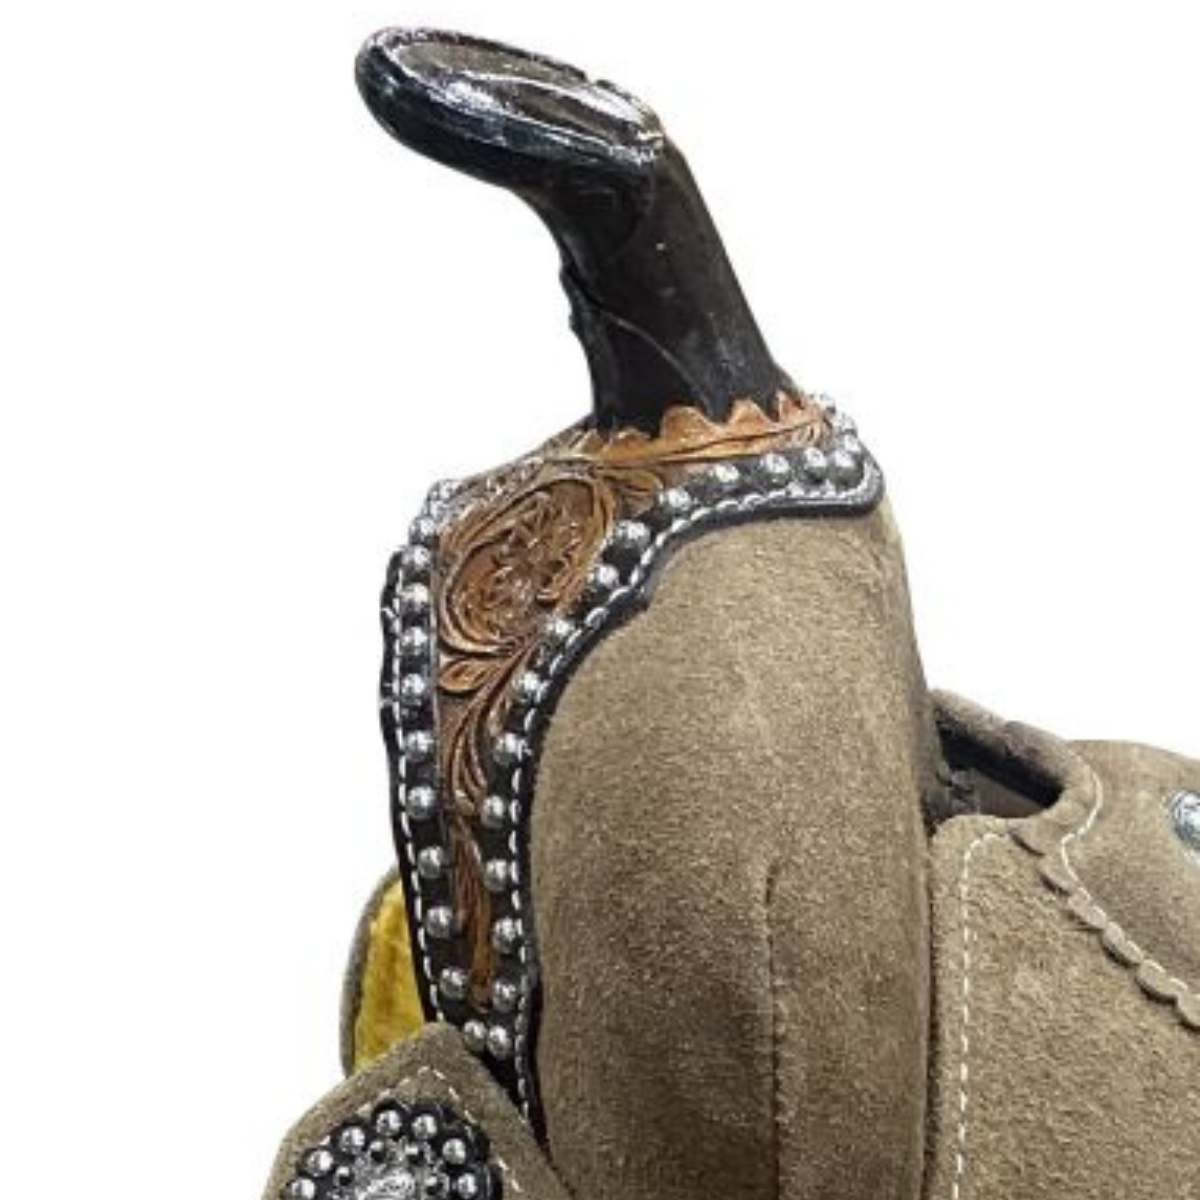 10" DOUBLE T  Rough Out Barrel style saddle with Sunflower and Cheetah print Inlay. - Double T Saddles